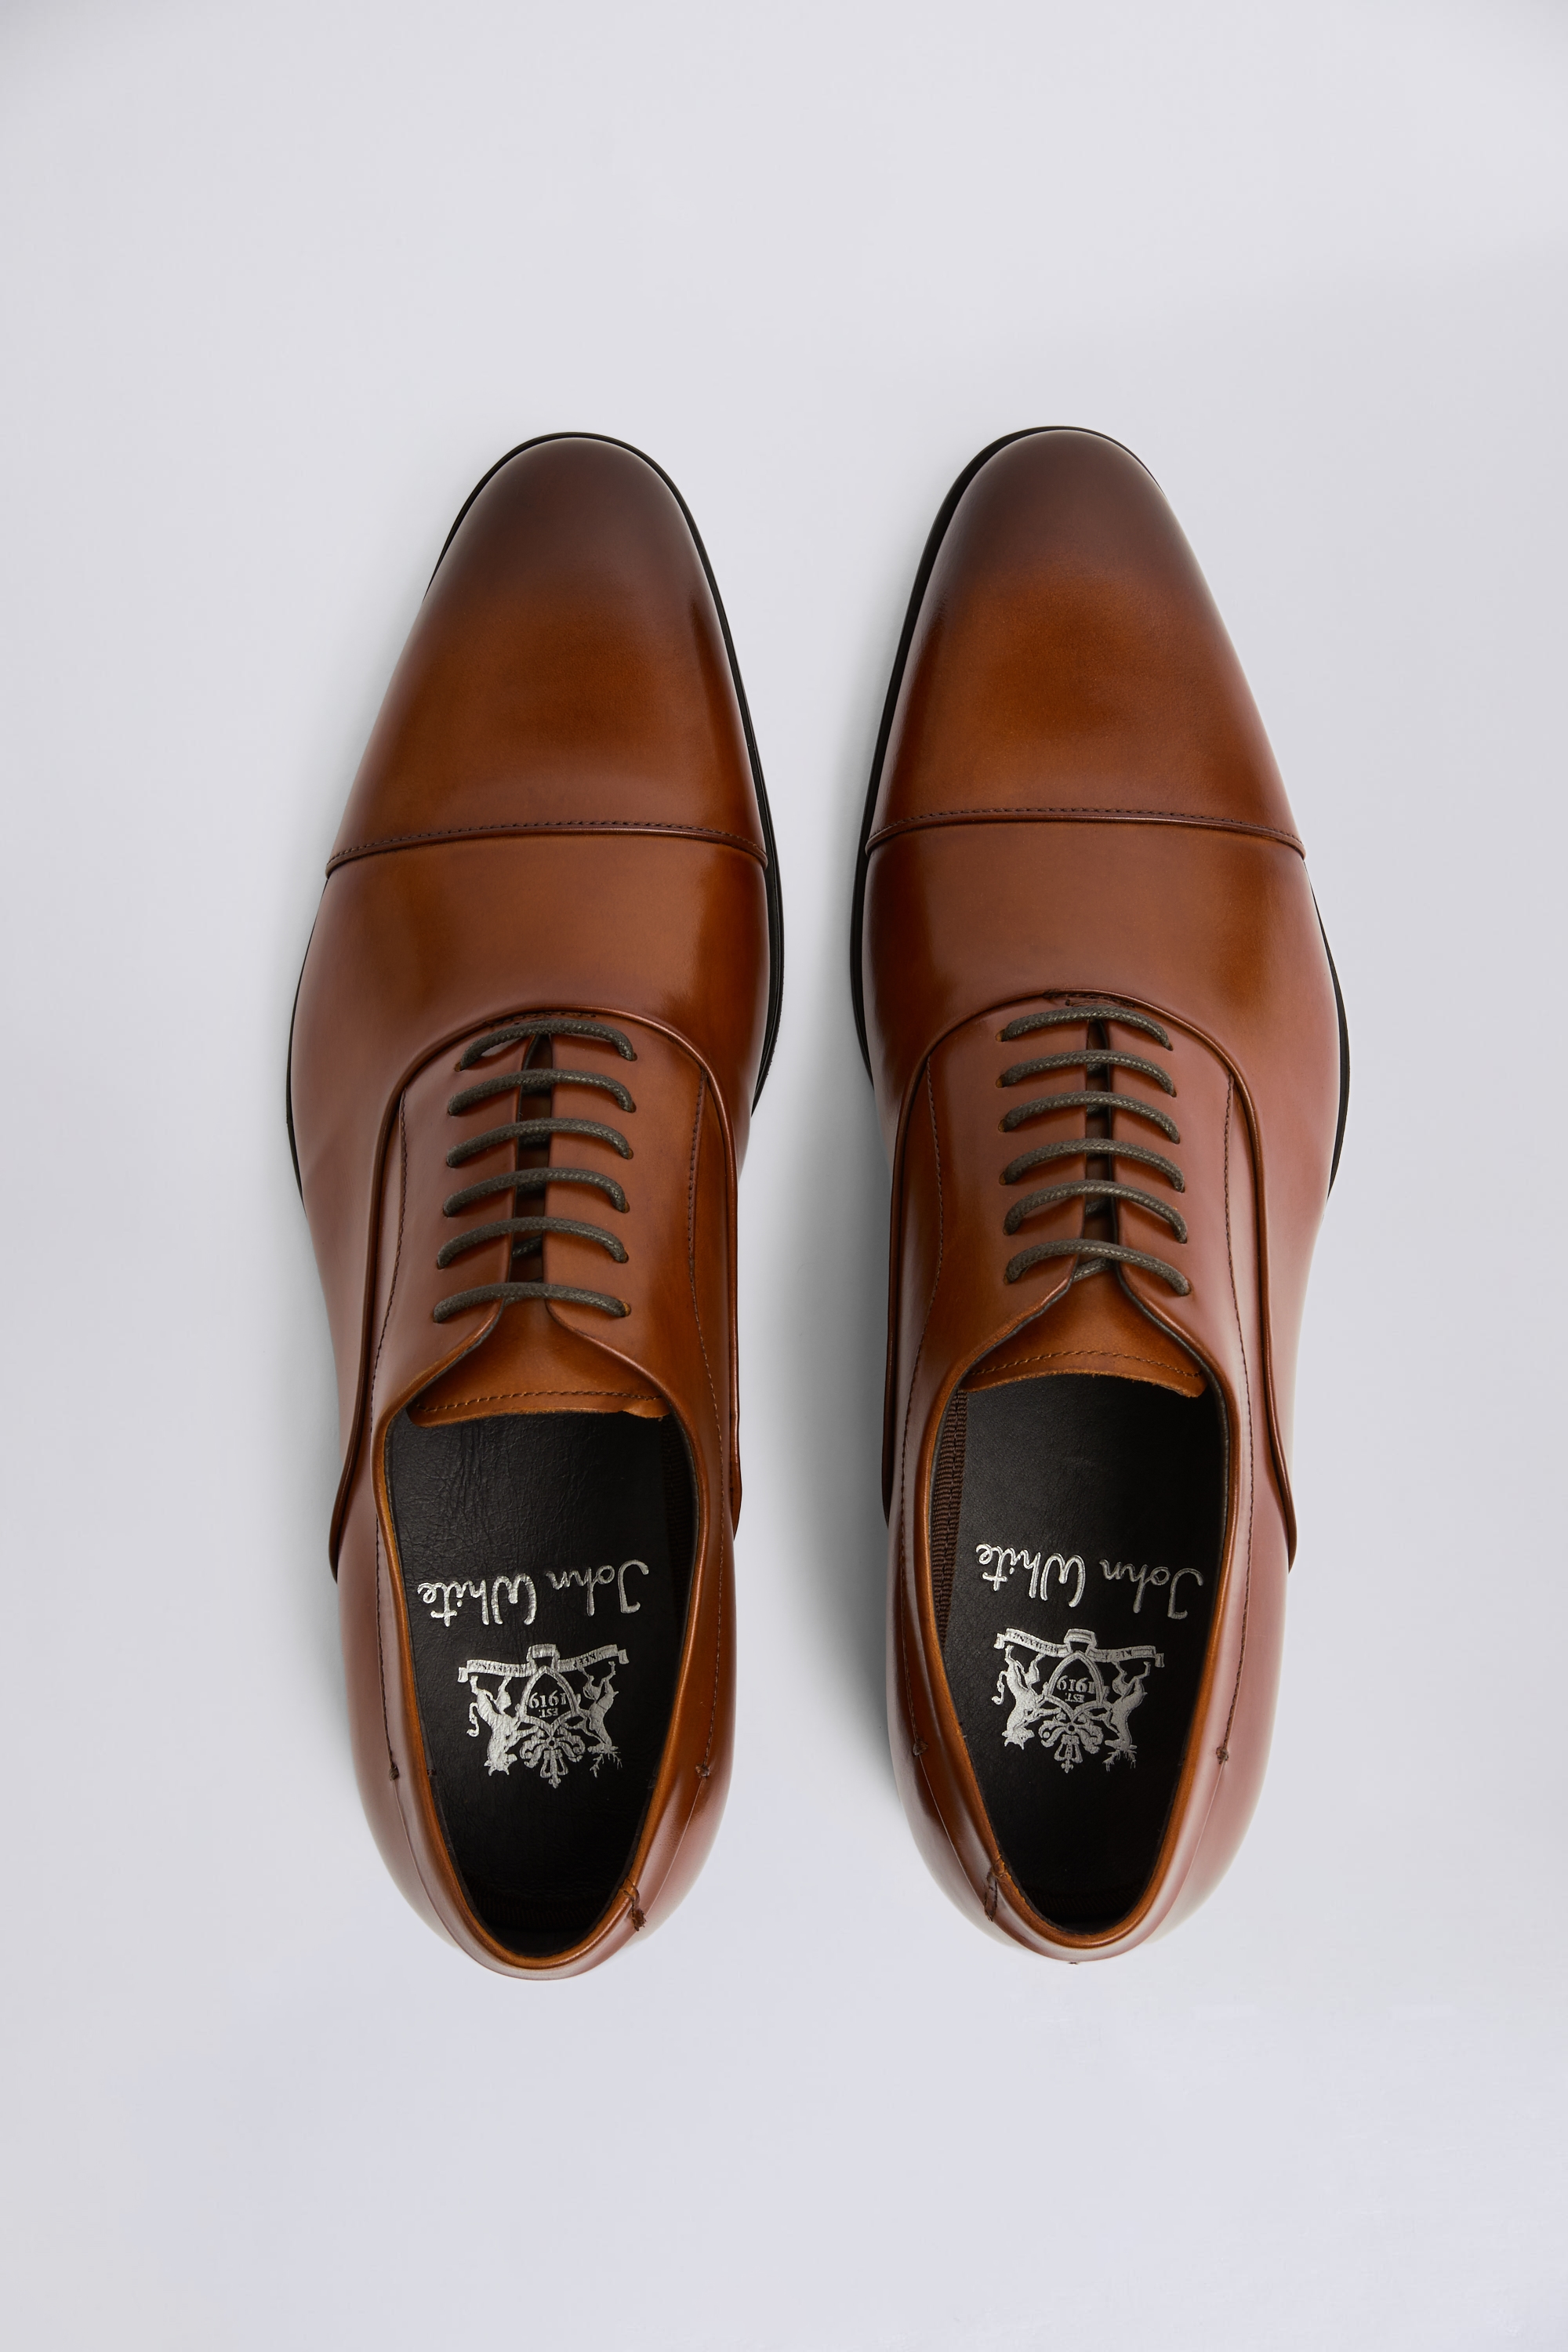 John White Guildhall Tan Oxford Shoes | Buy Online at Moss